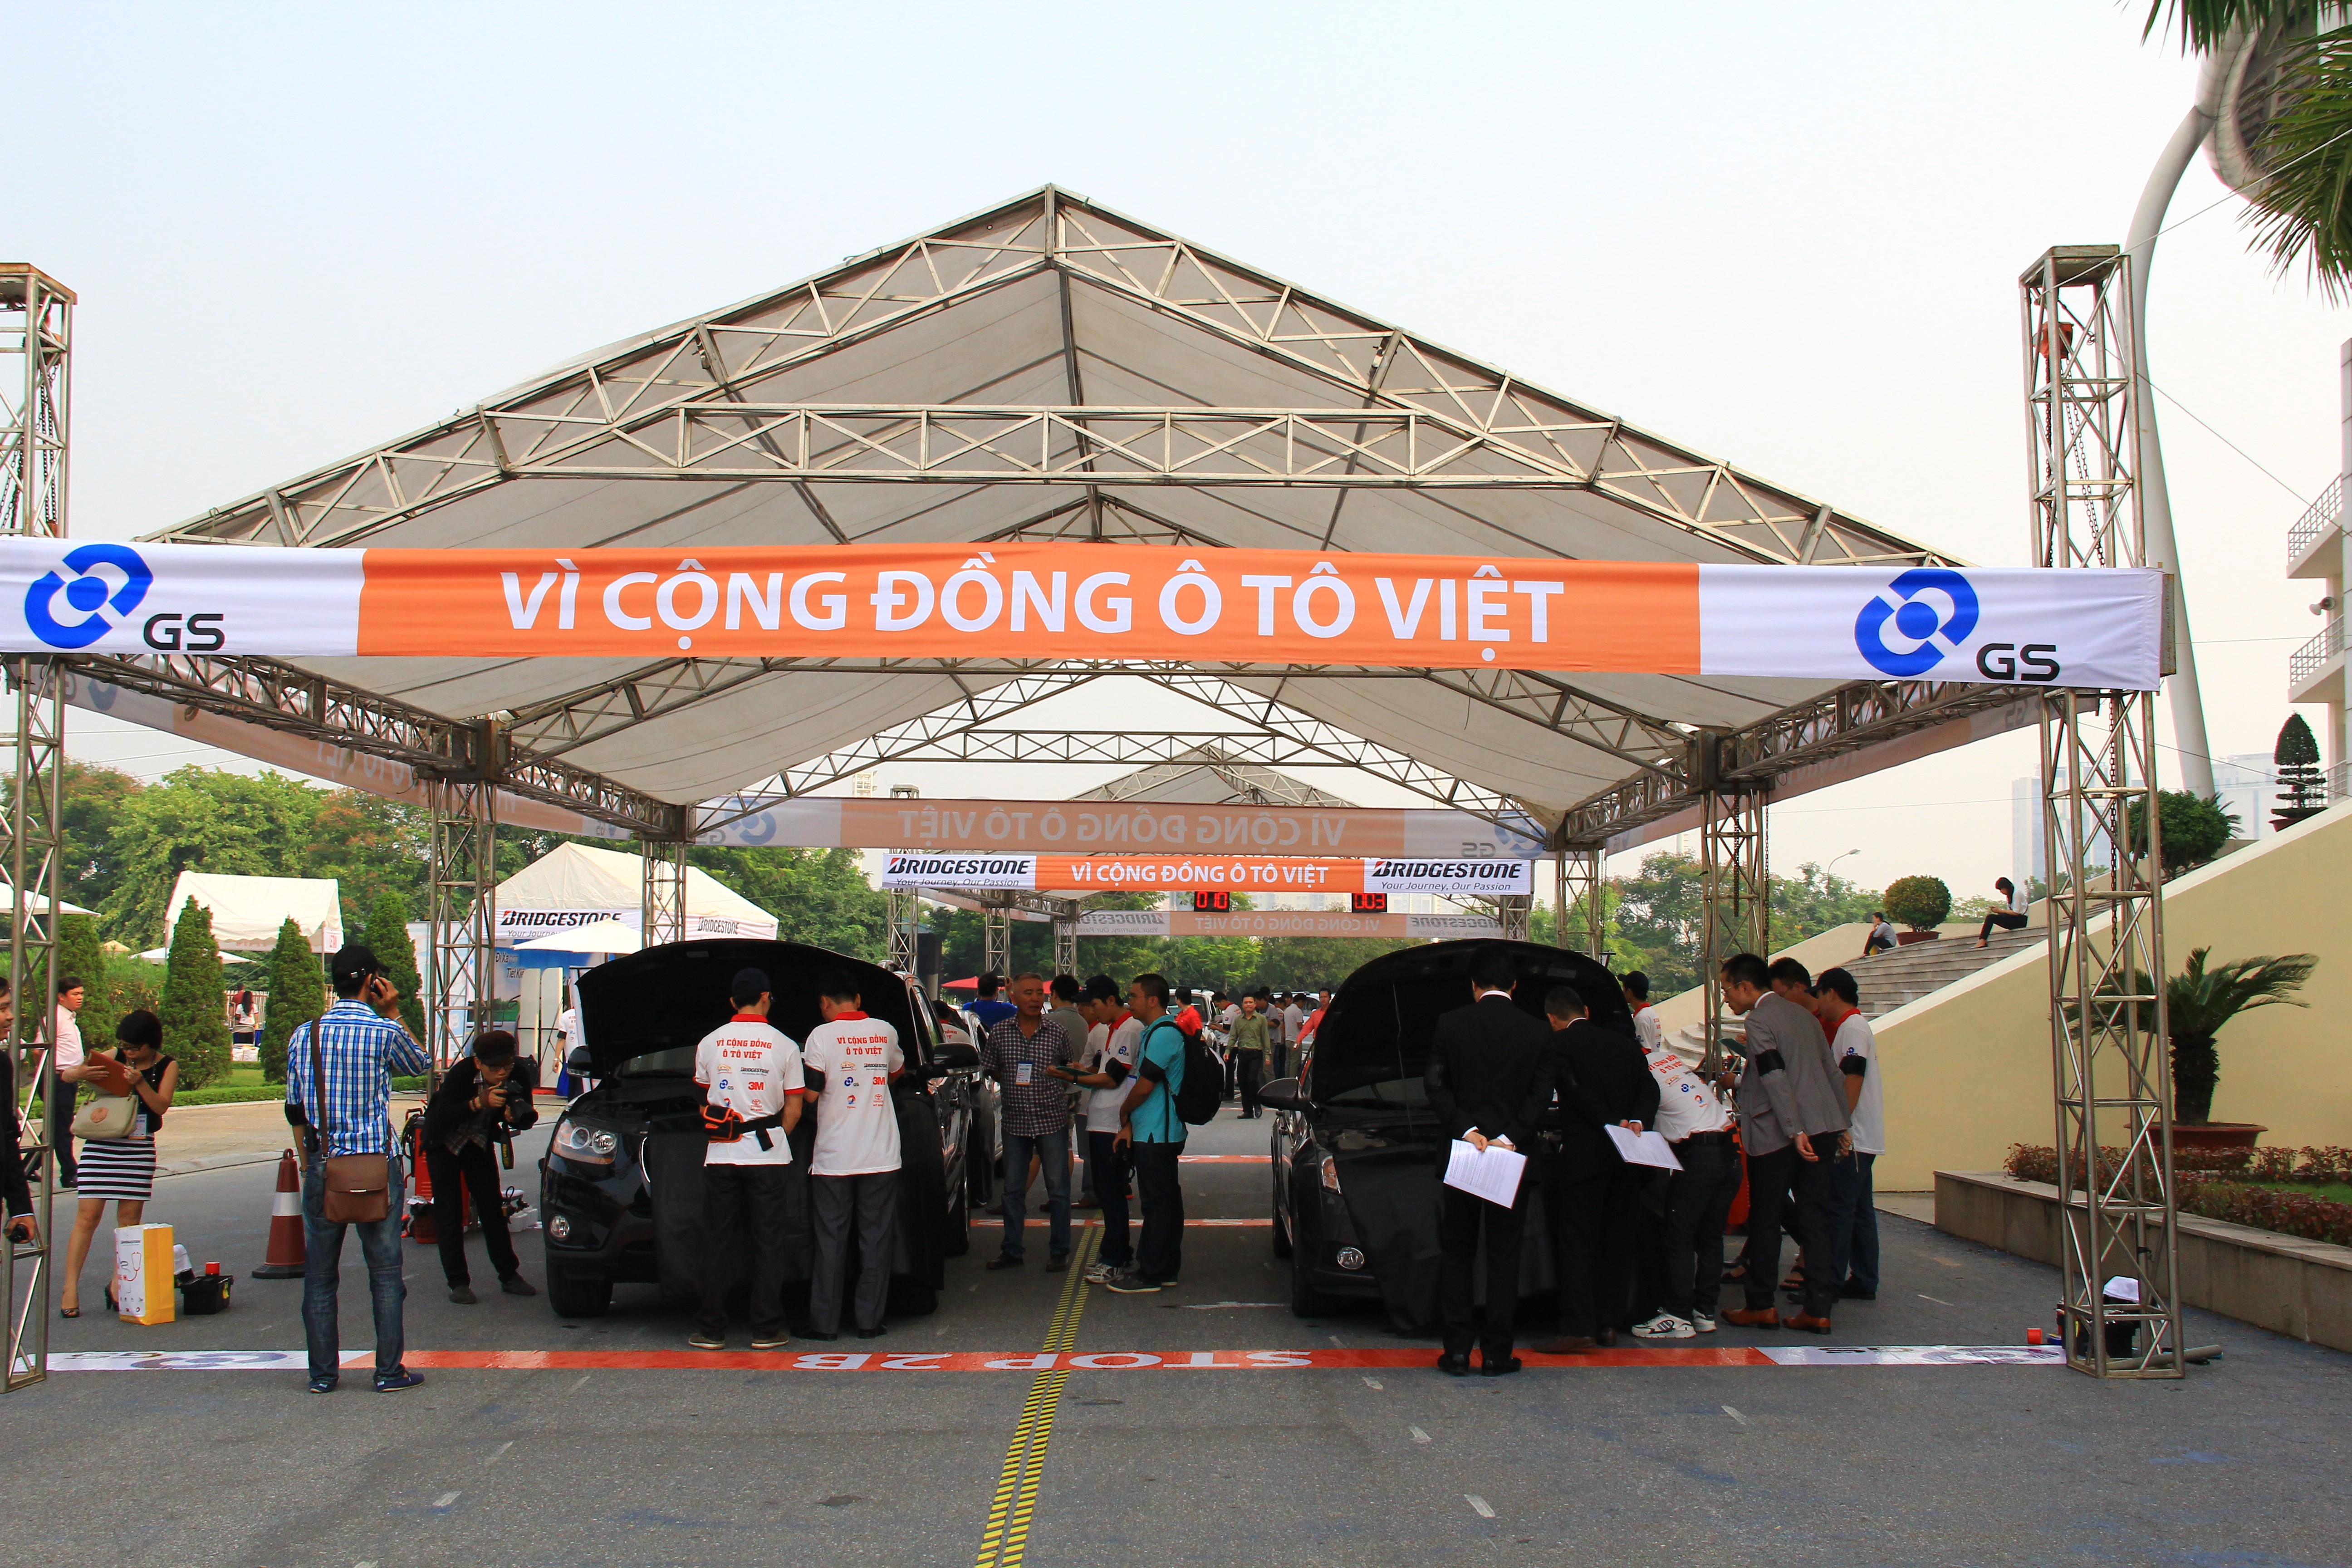 Summary picture of “The Car Care Day” in Ha Noi on 12 & 13rd Oct, 2013.